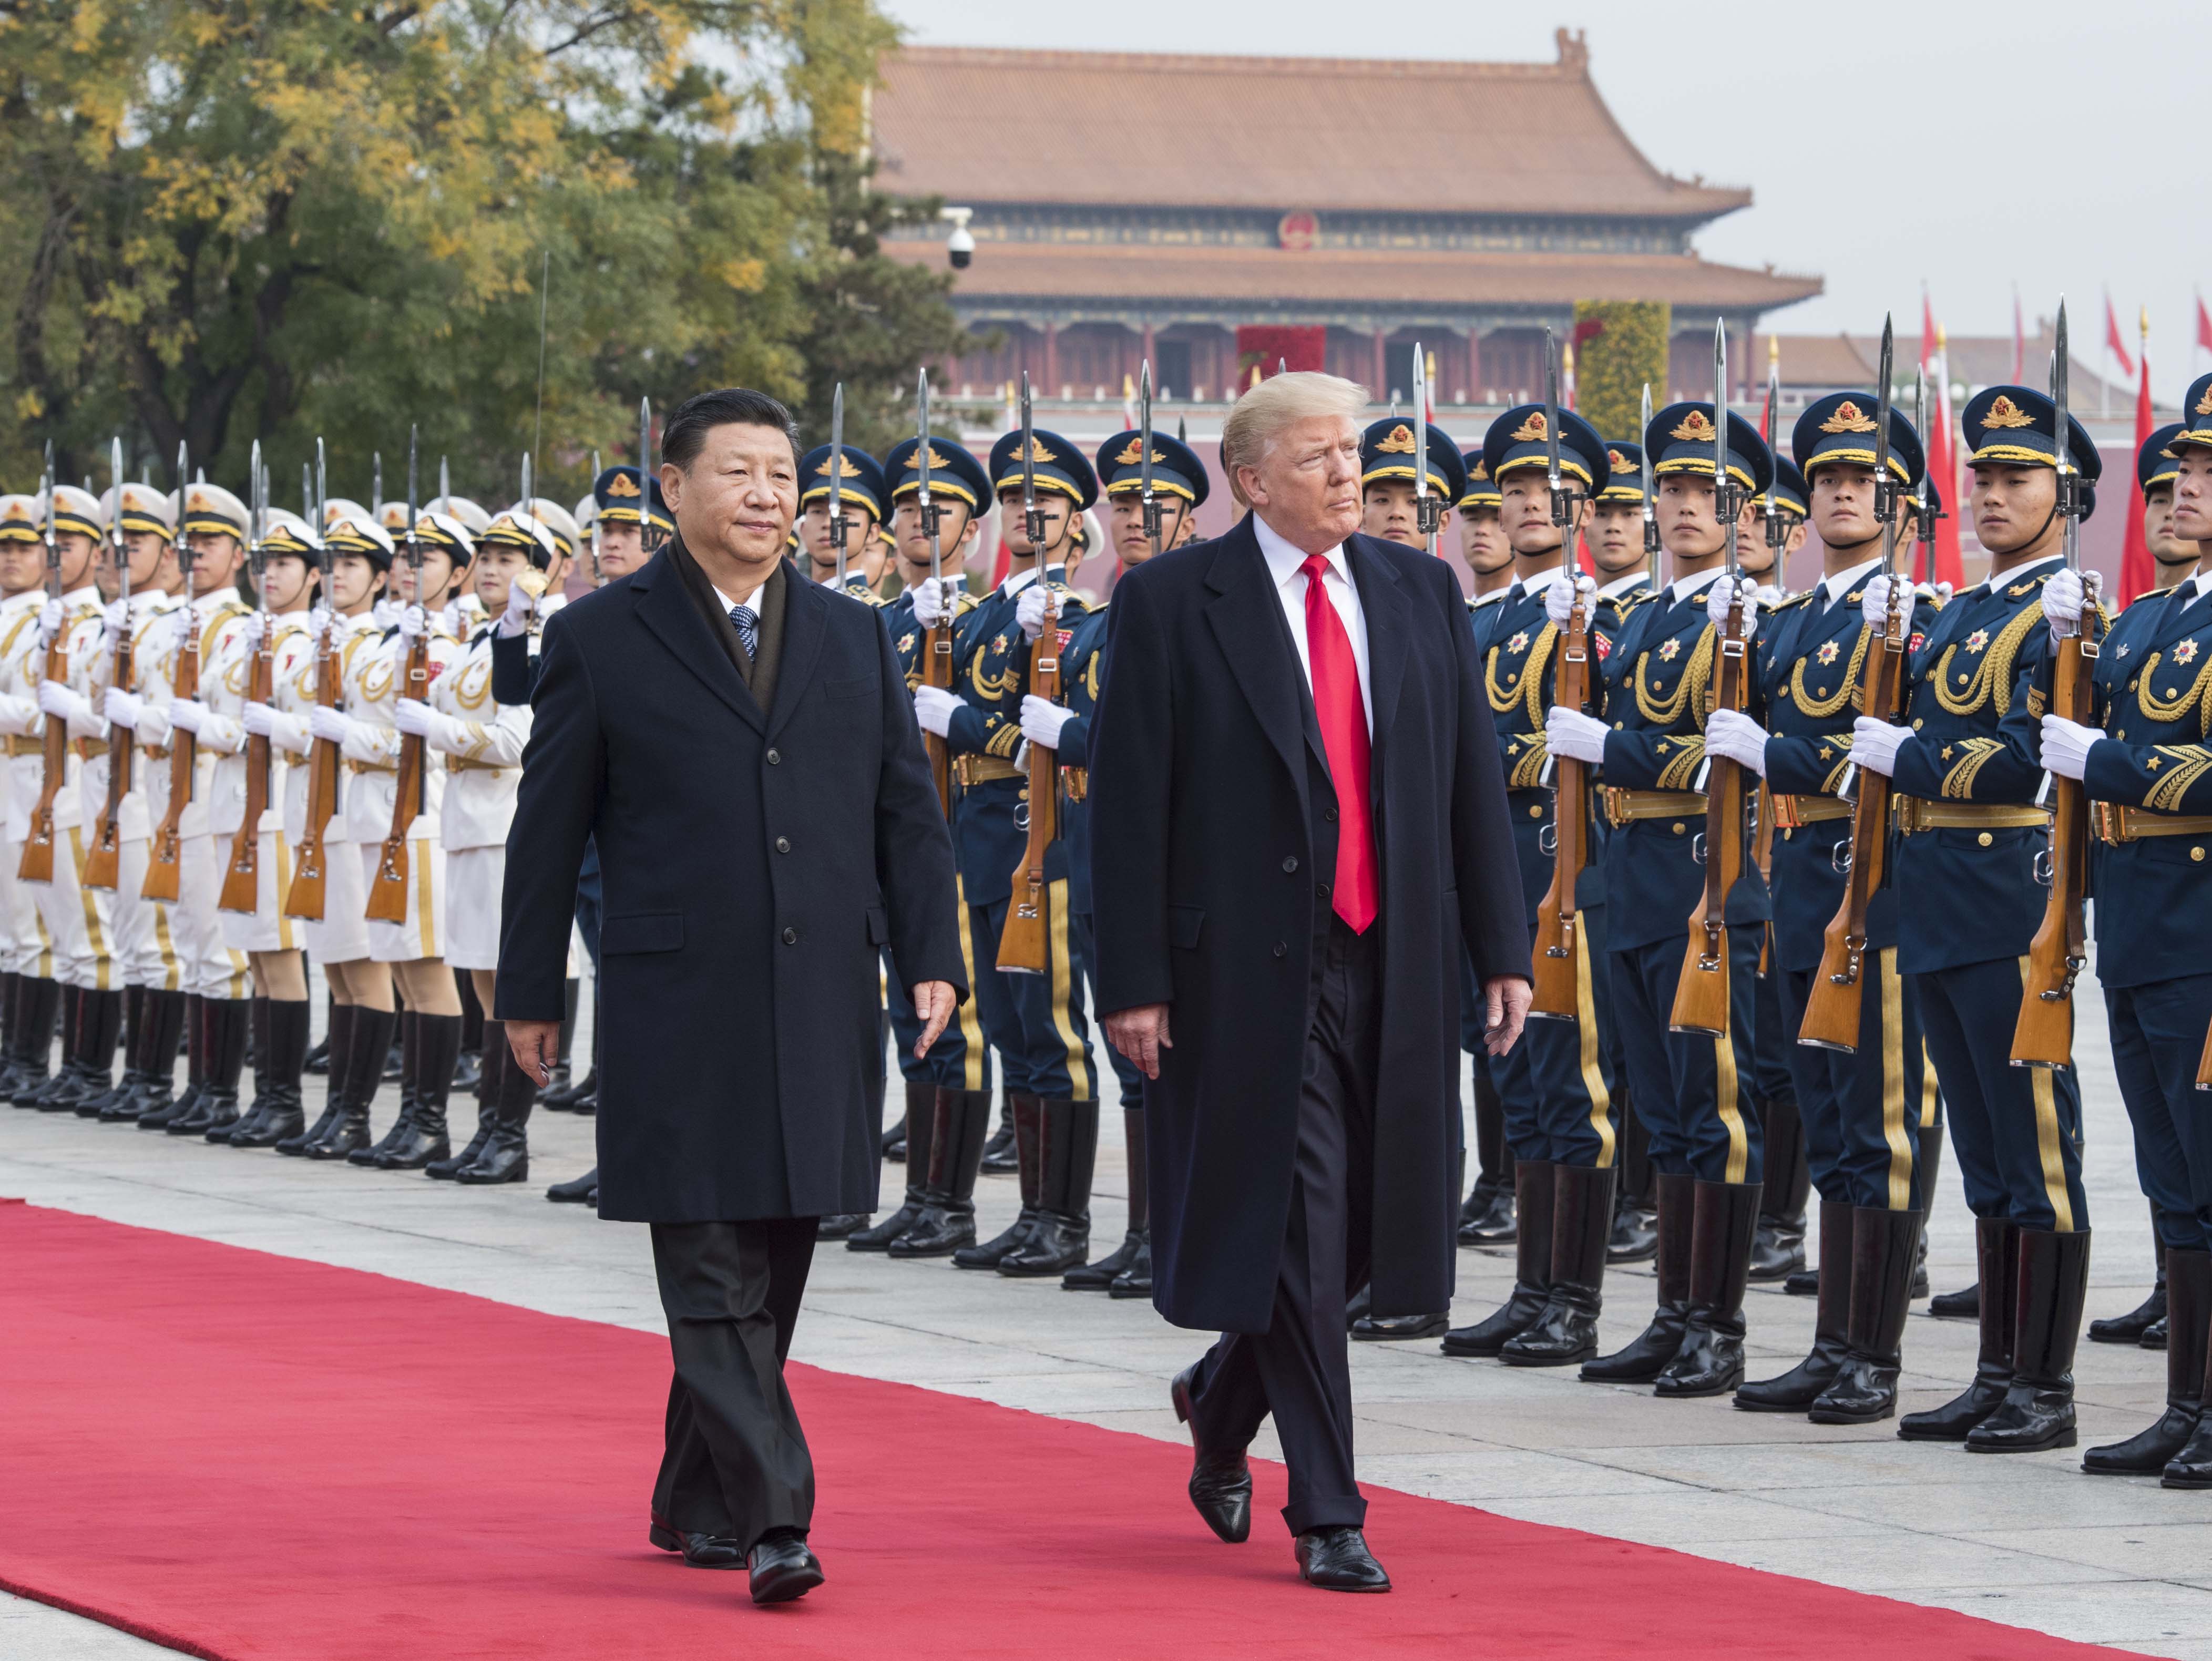 Chinese President Xi Jinping (L) holds a grand ceremony to welcome U.S. President Donald Trump at the square outside the east gate of the Great Hall of the People in Beijing, China, on Nov. 9, 2017. (Xinhua News Agency/Getty Images)